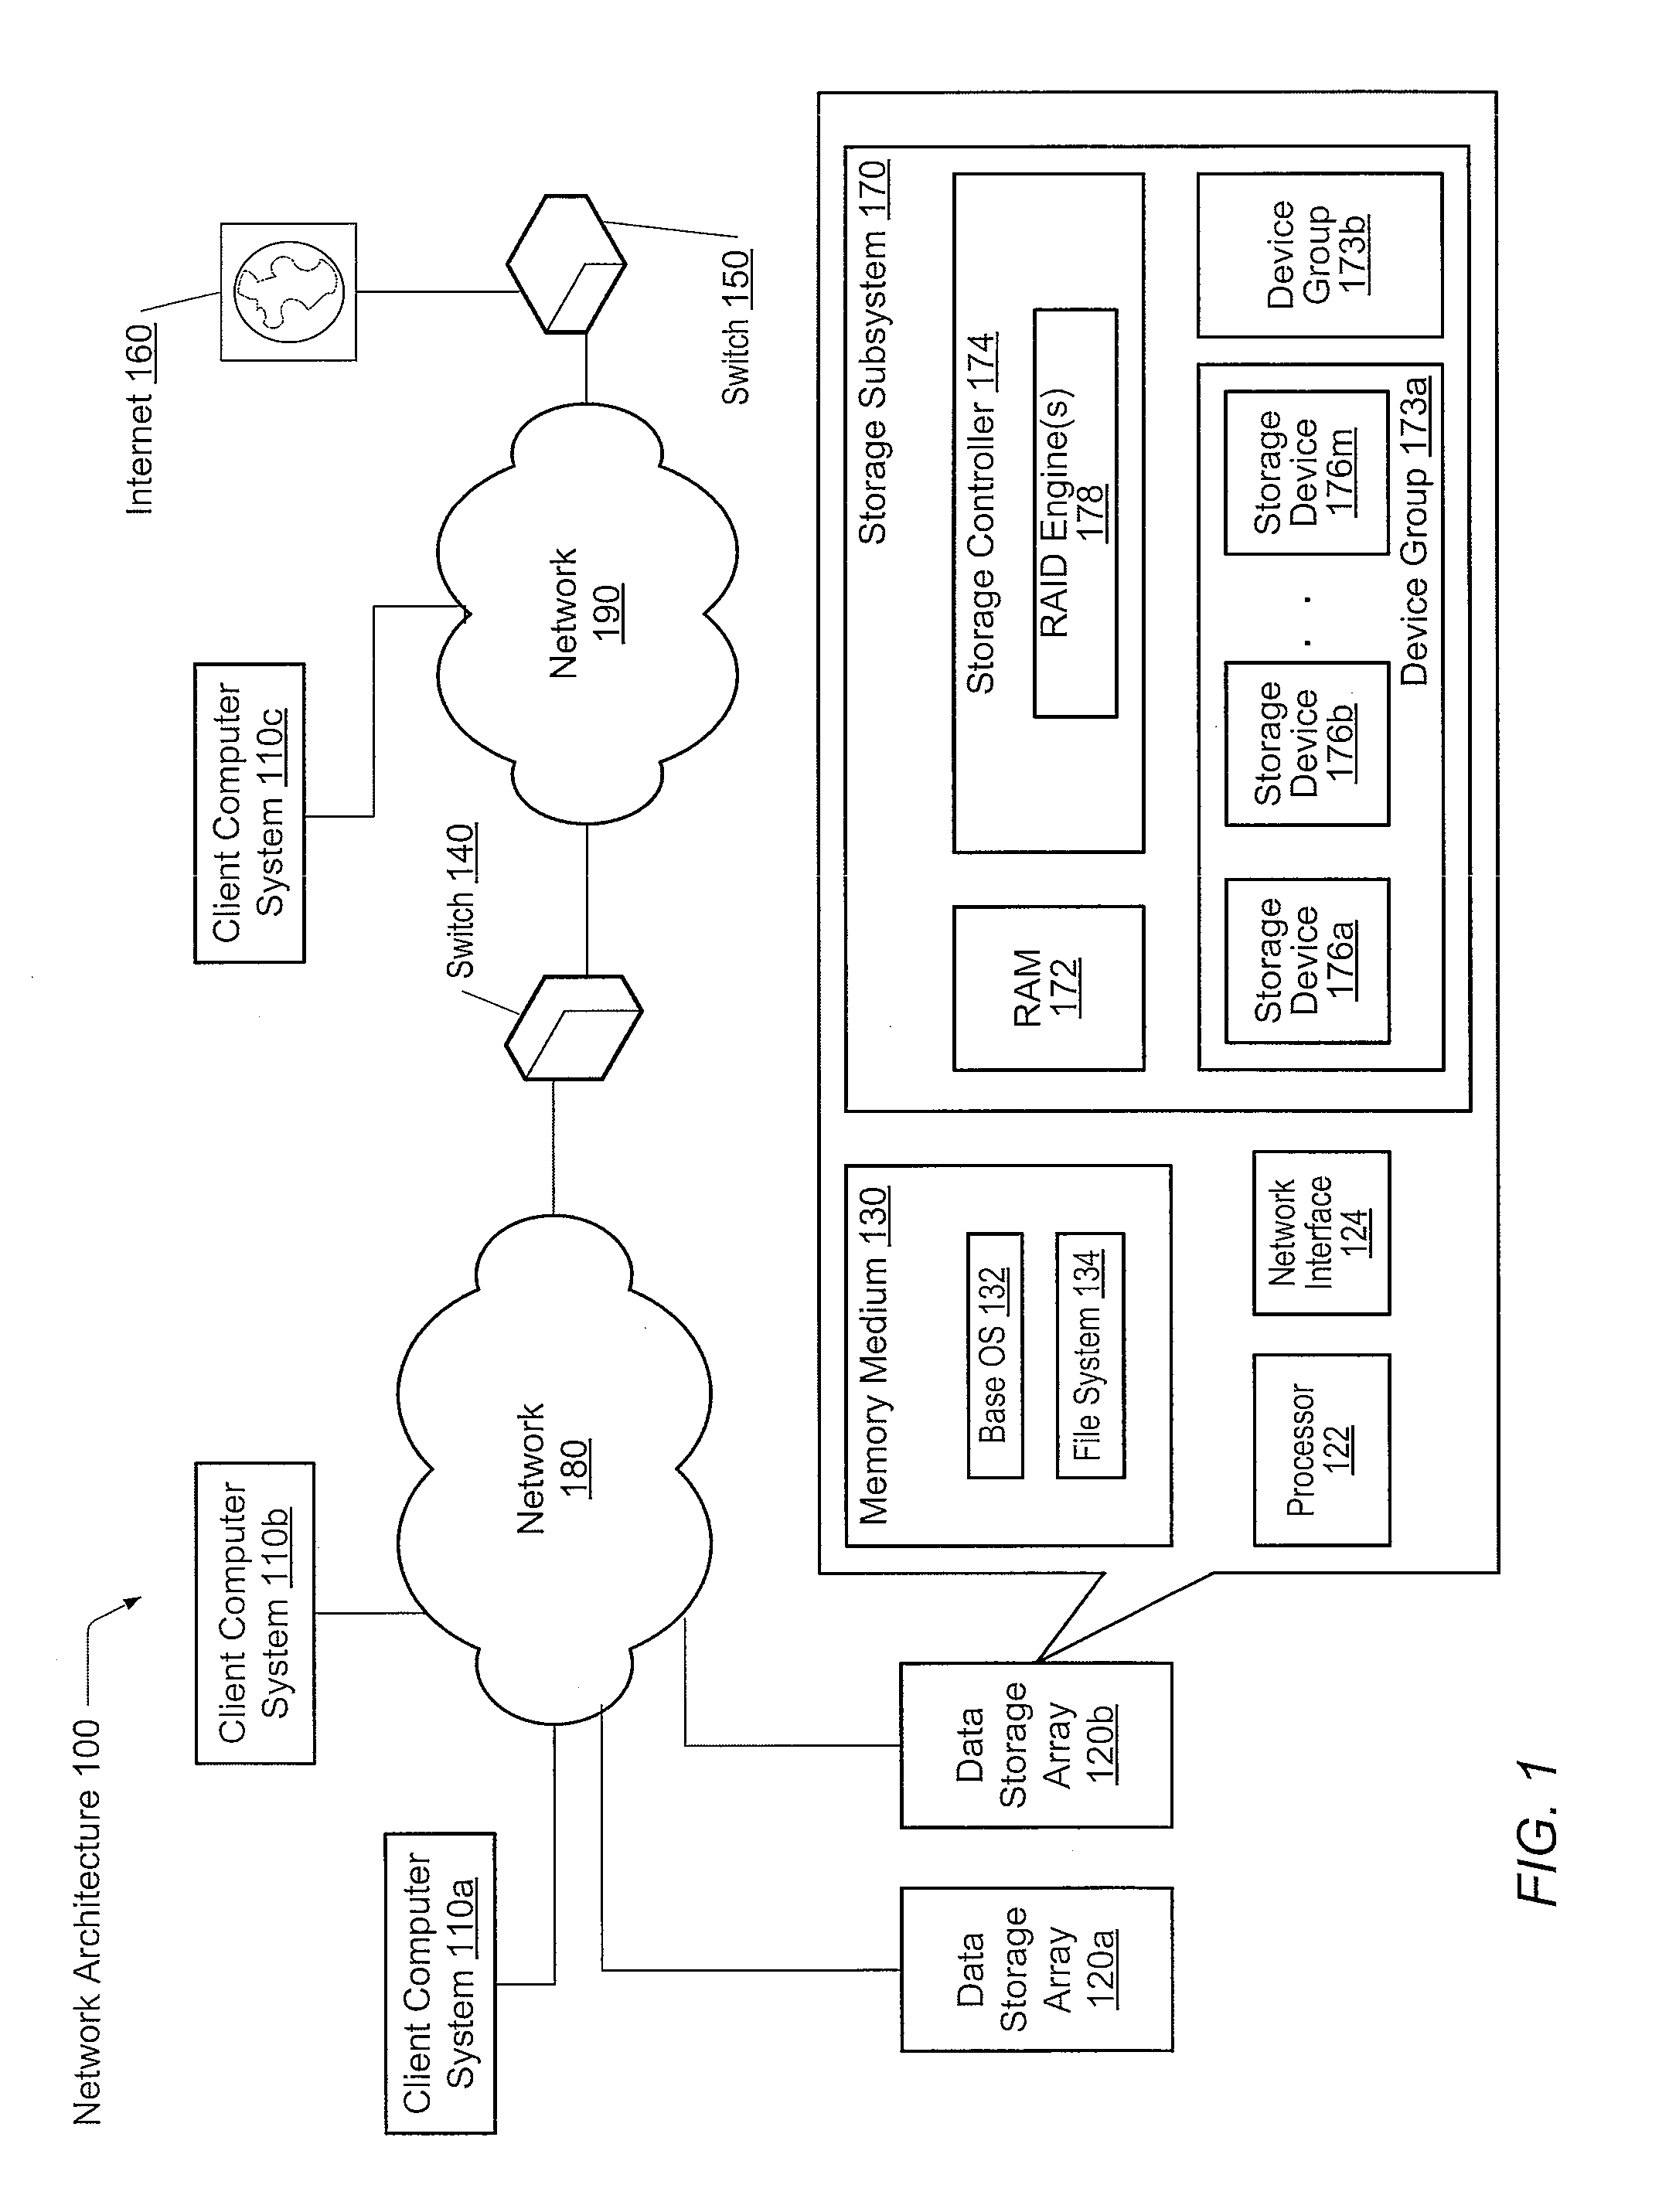 Intra-device data protection in a raid array